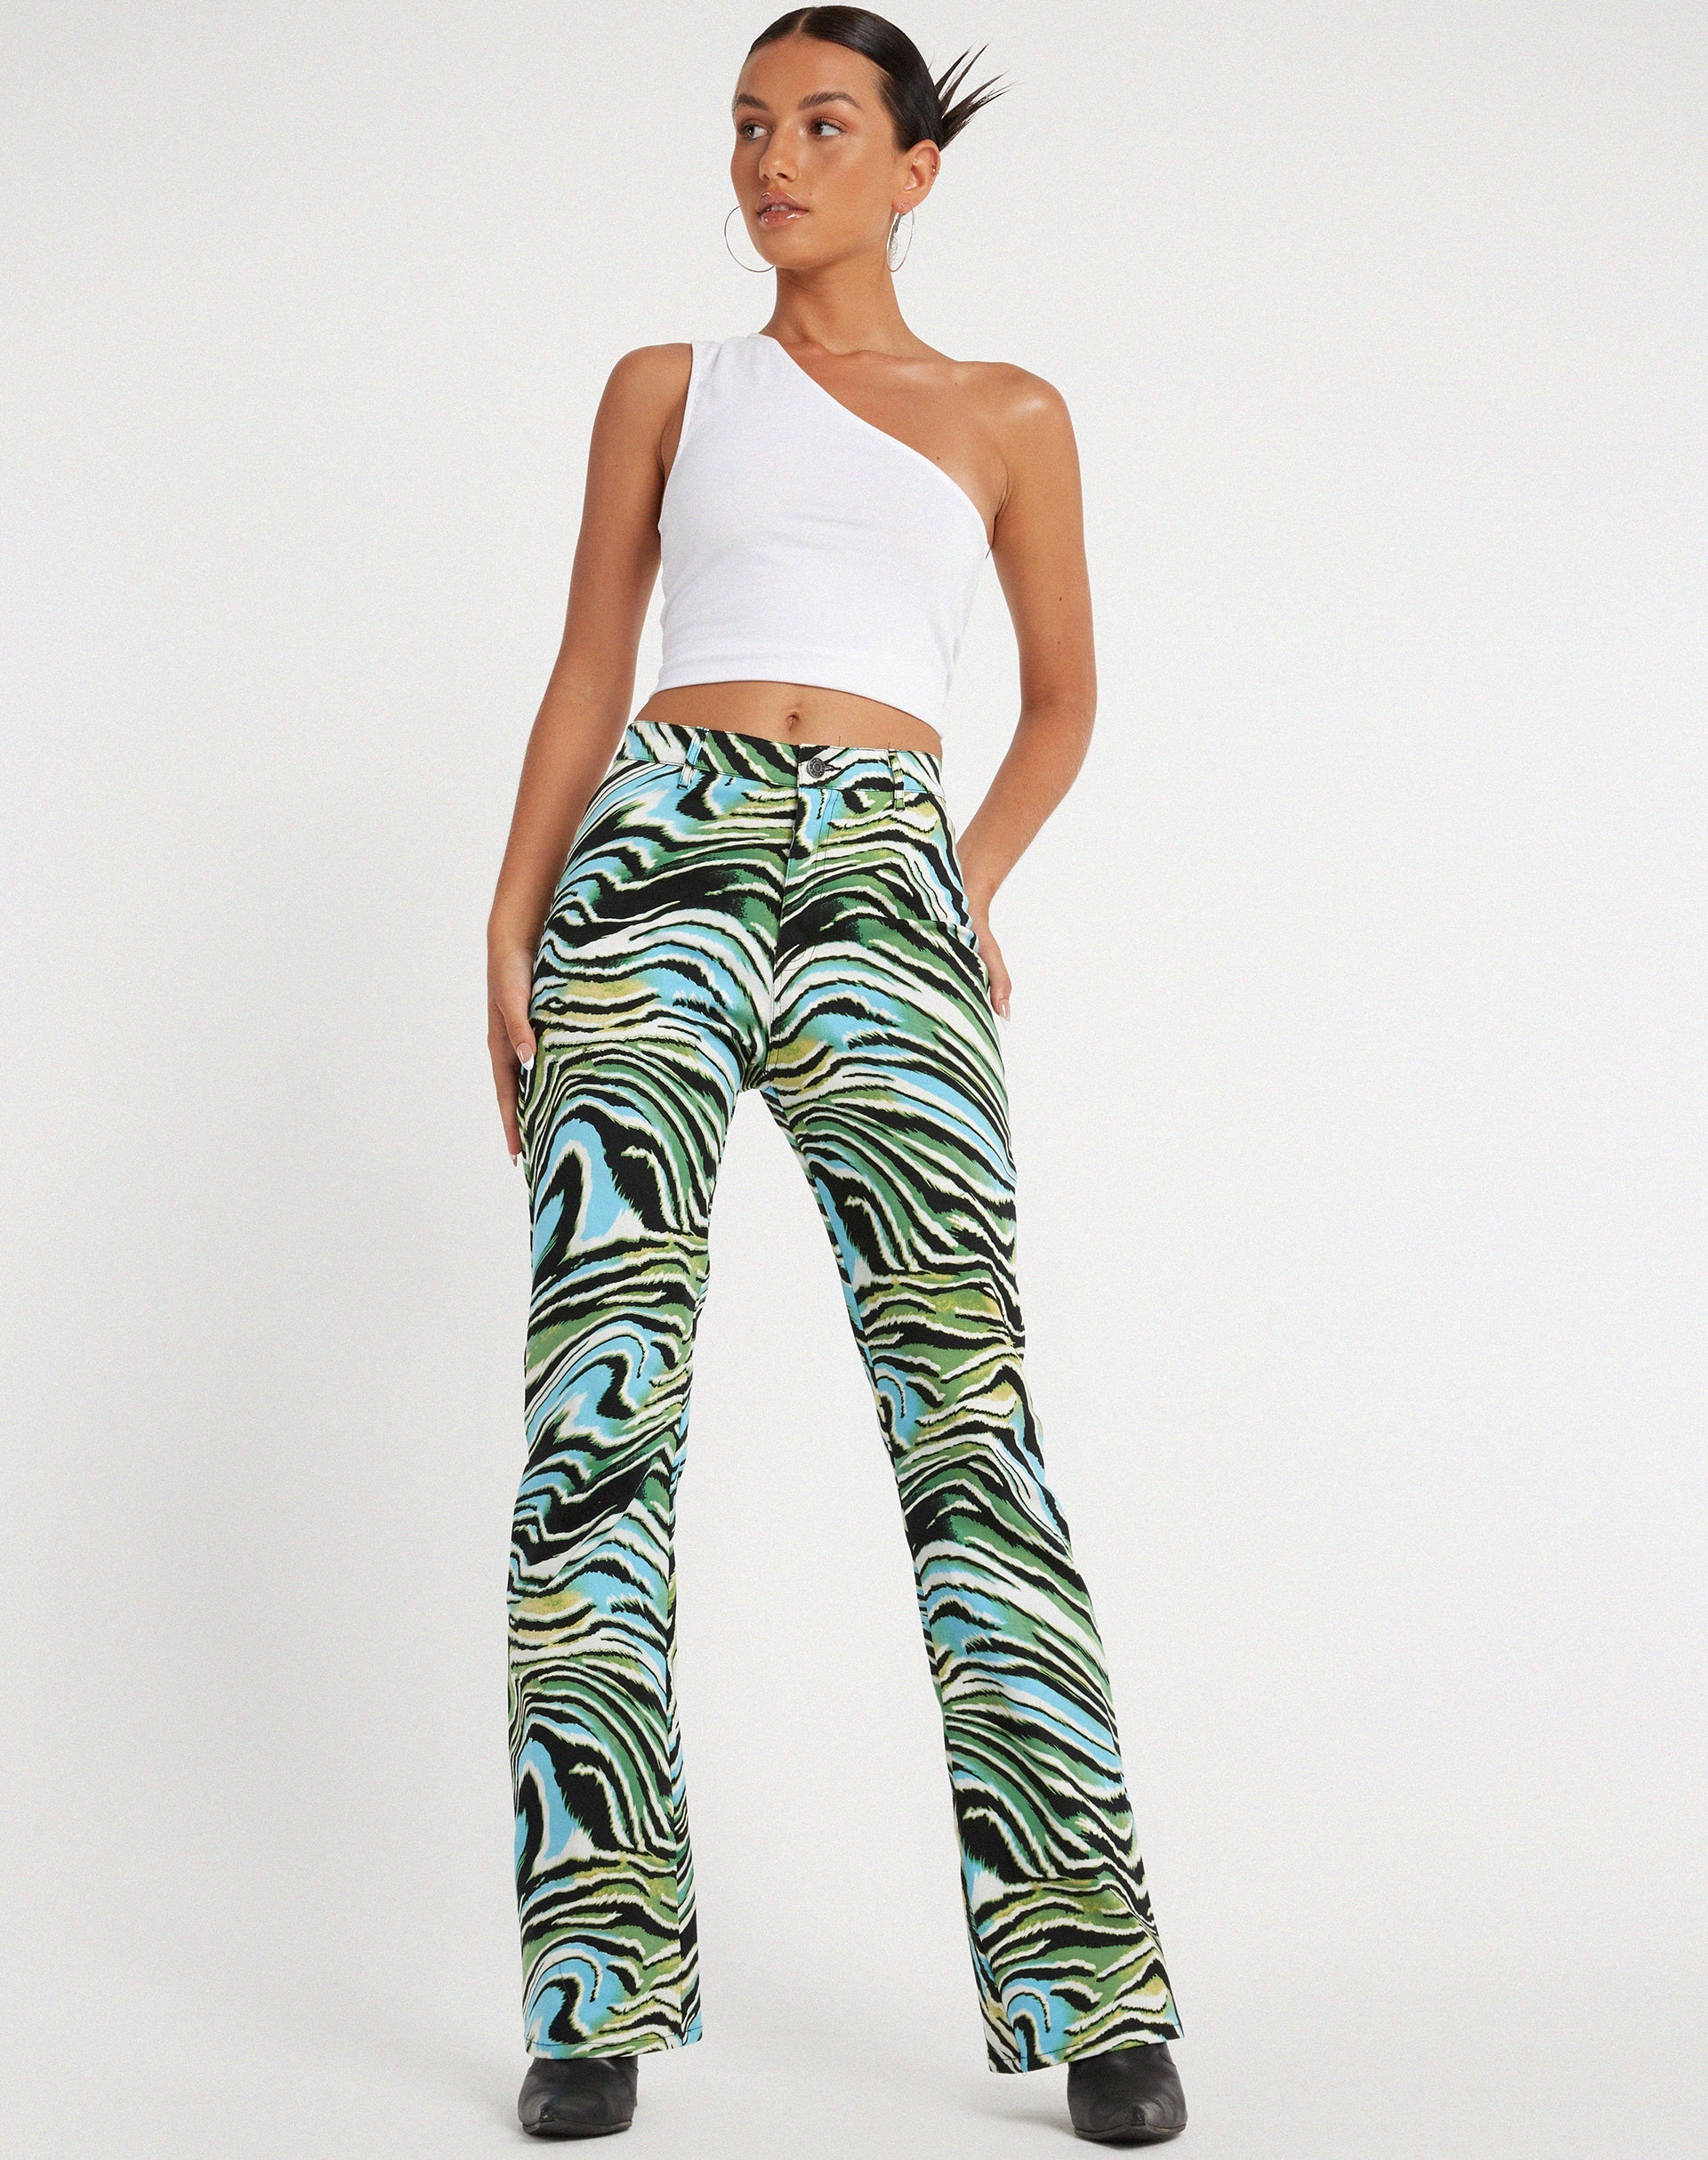 image of Zoven Flare Trouser in Warped Zebra Blue